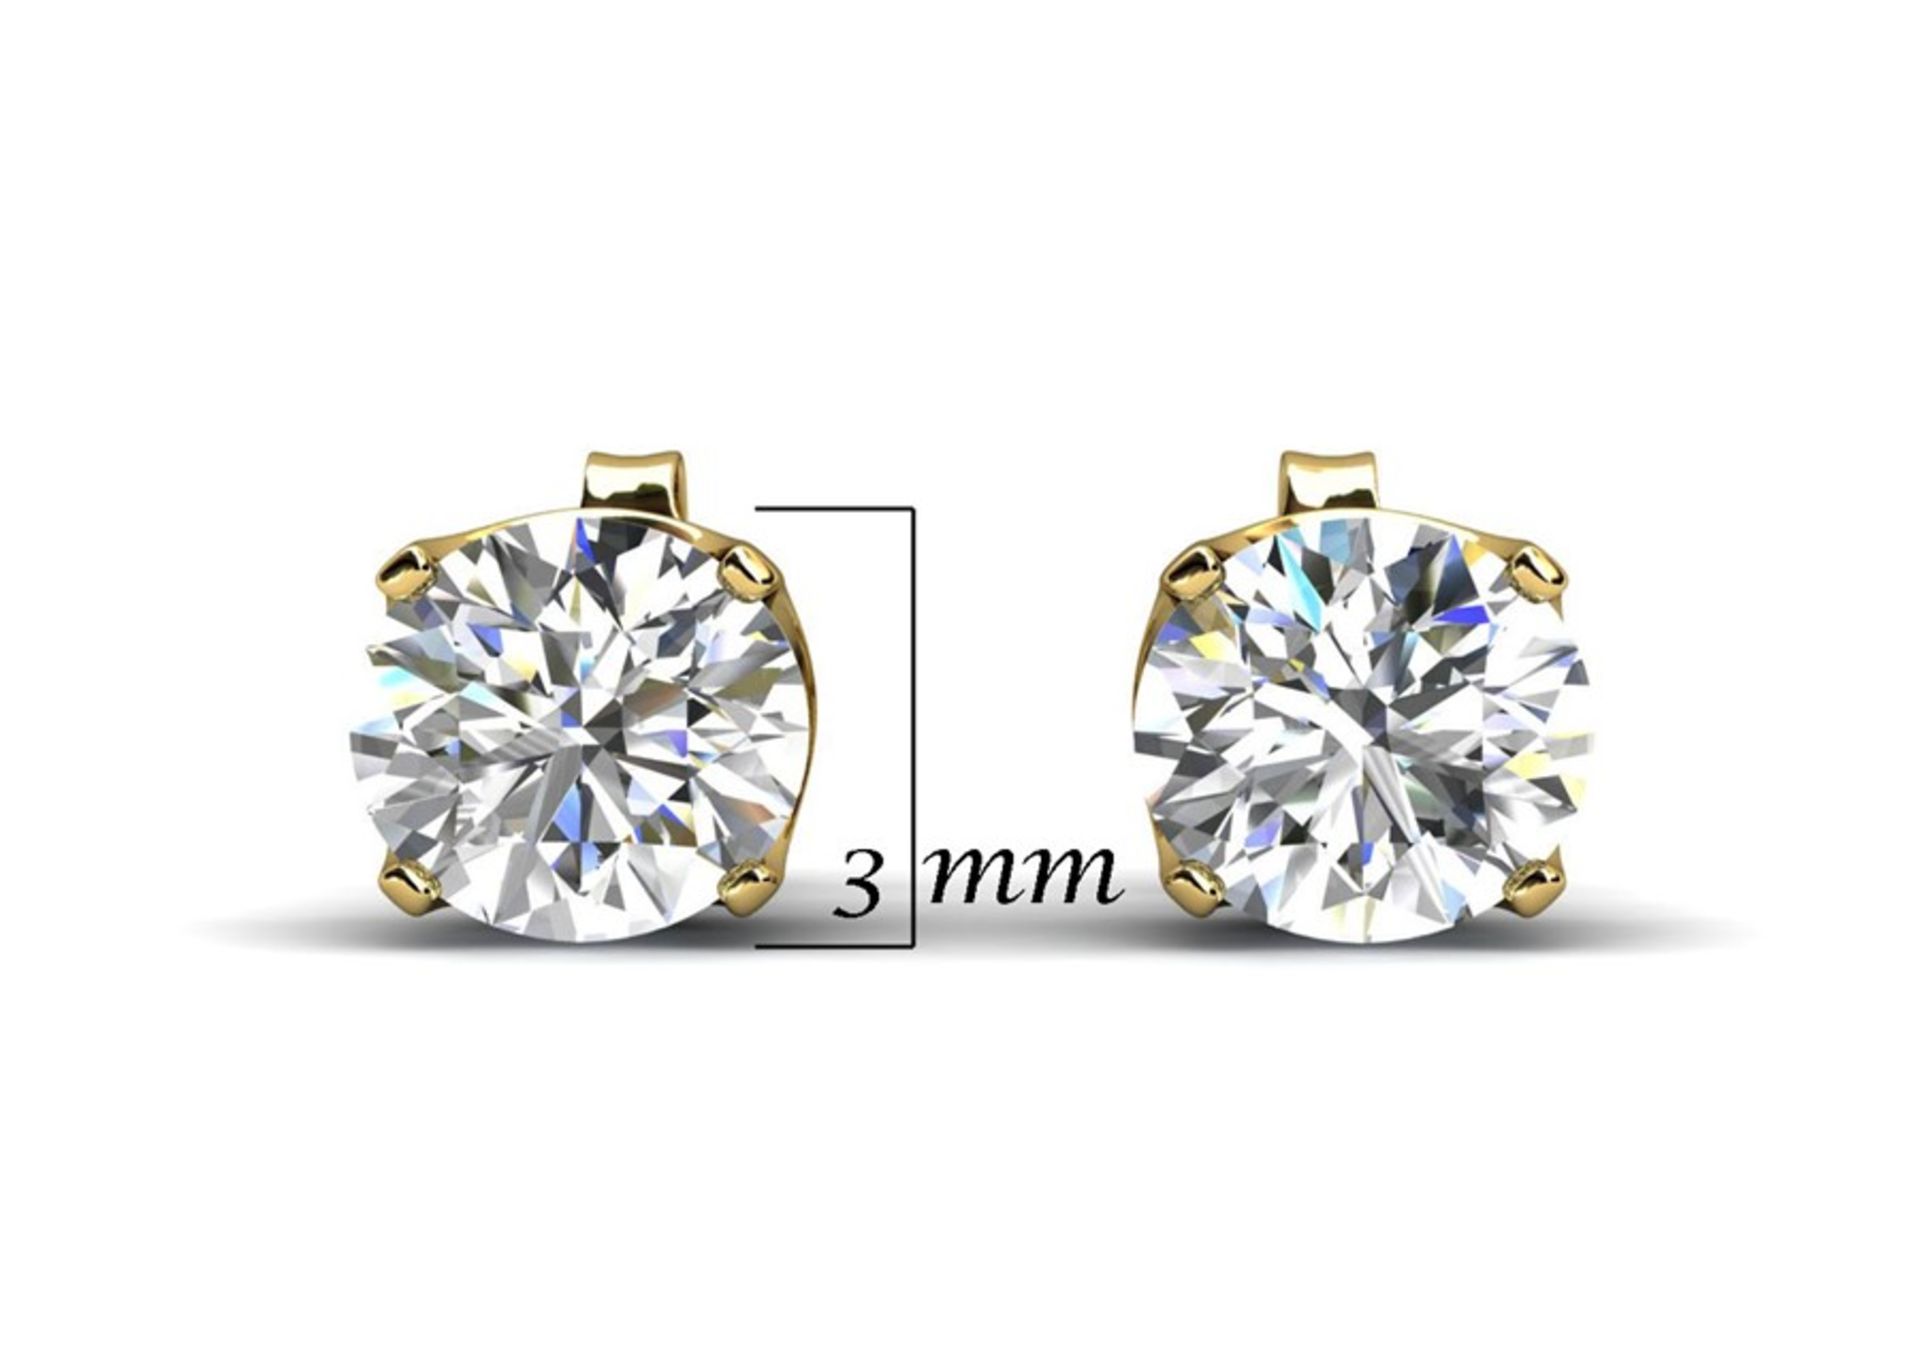 Valued by GIE £5,745.00 - 9ct Single Stone Claw Set Diamond Earring 0.40 Carats - 7203010, Colour-D, - Image 8 of 9